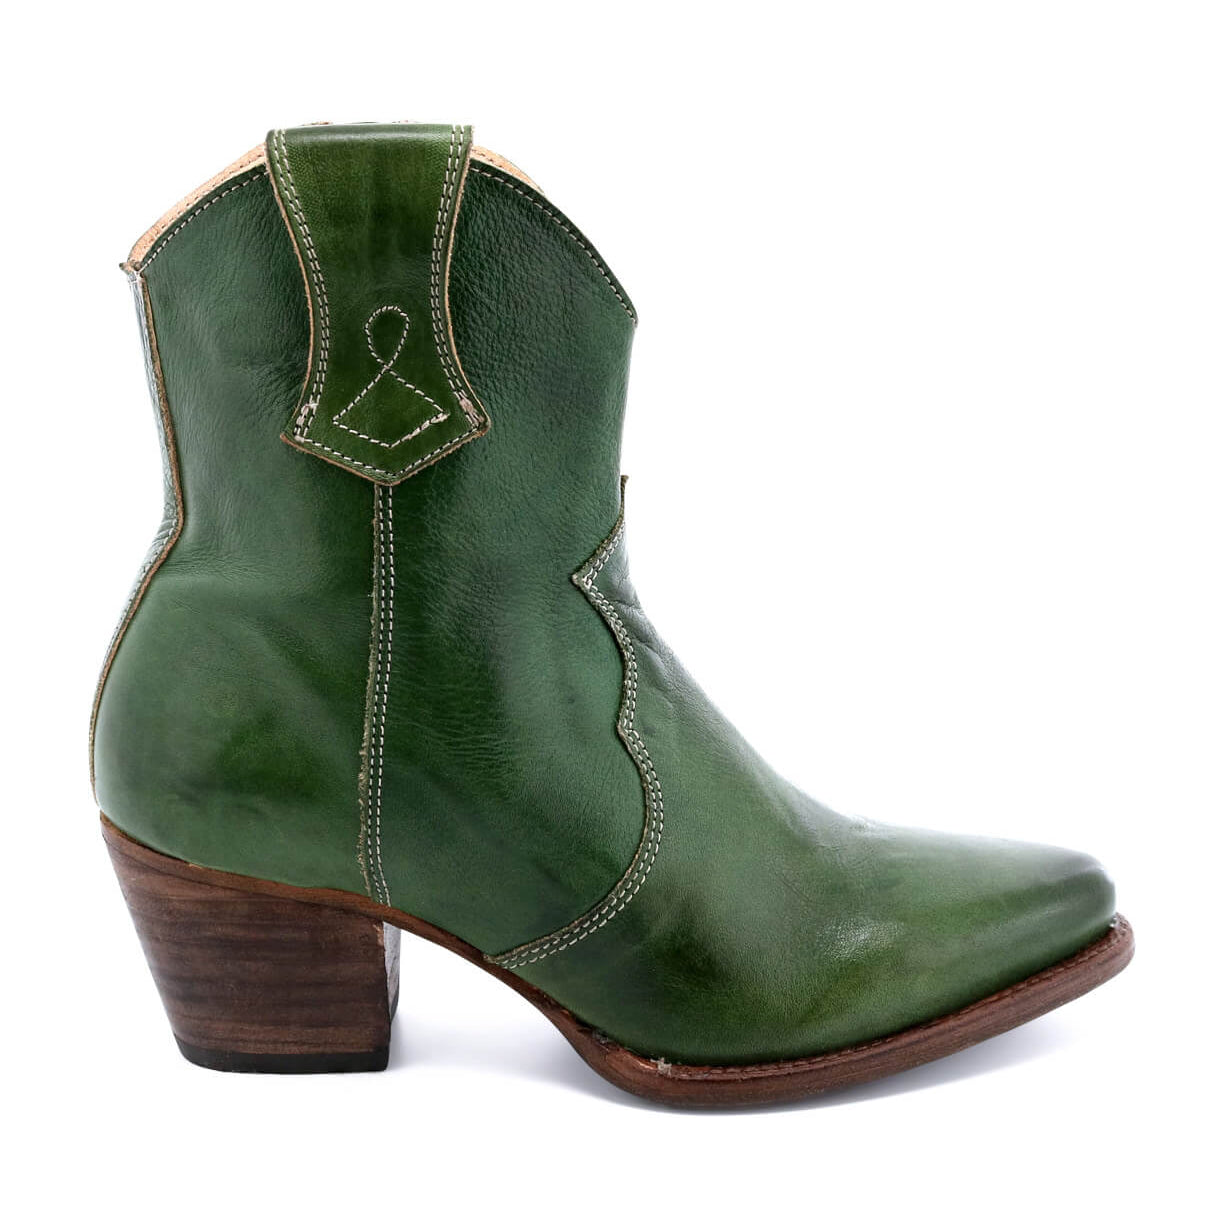 A green Baila cowboy boot with a wooden heel by Oak Tree Farms.